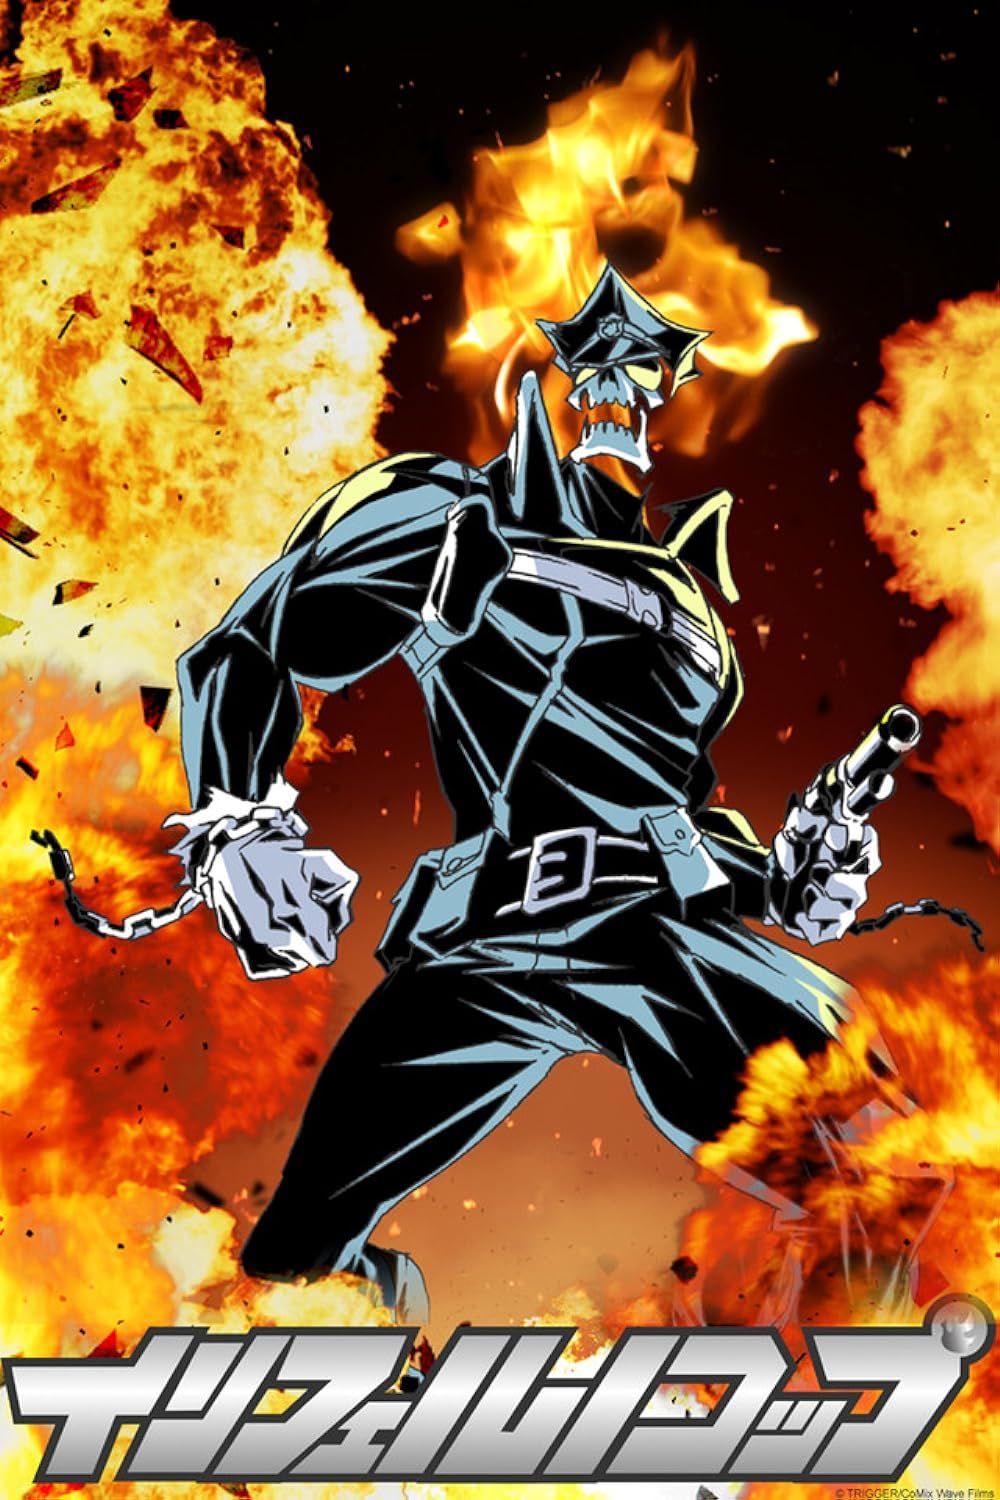 Inferno Cop standing within the flames in the anime poster (2012).